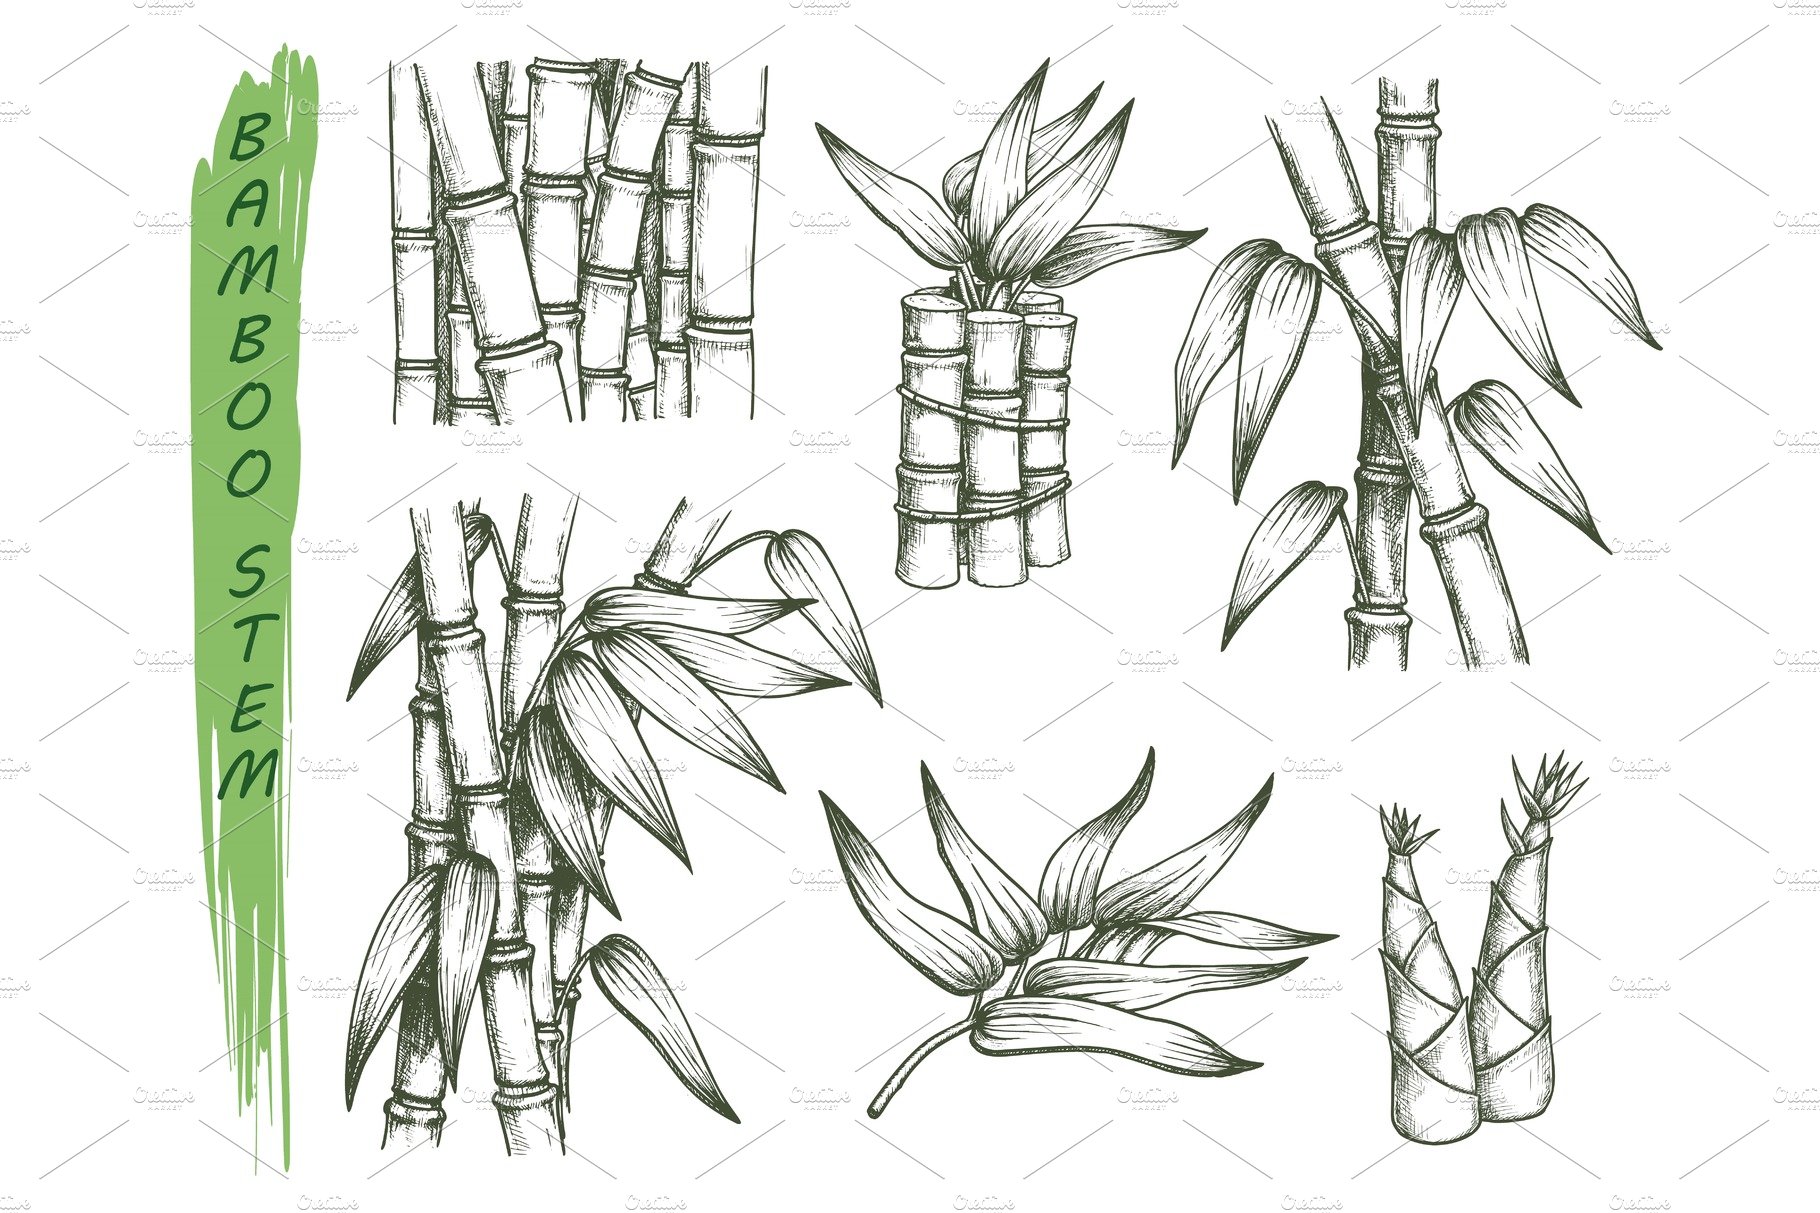 Brown bamboo stick with green leaves in sketch style isolated on